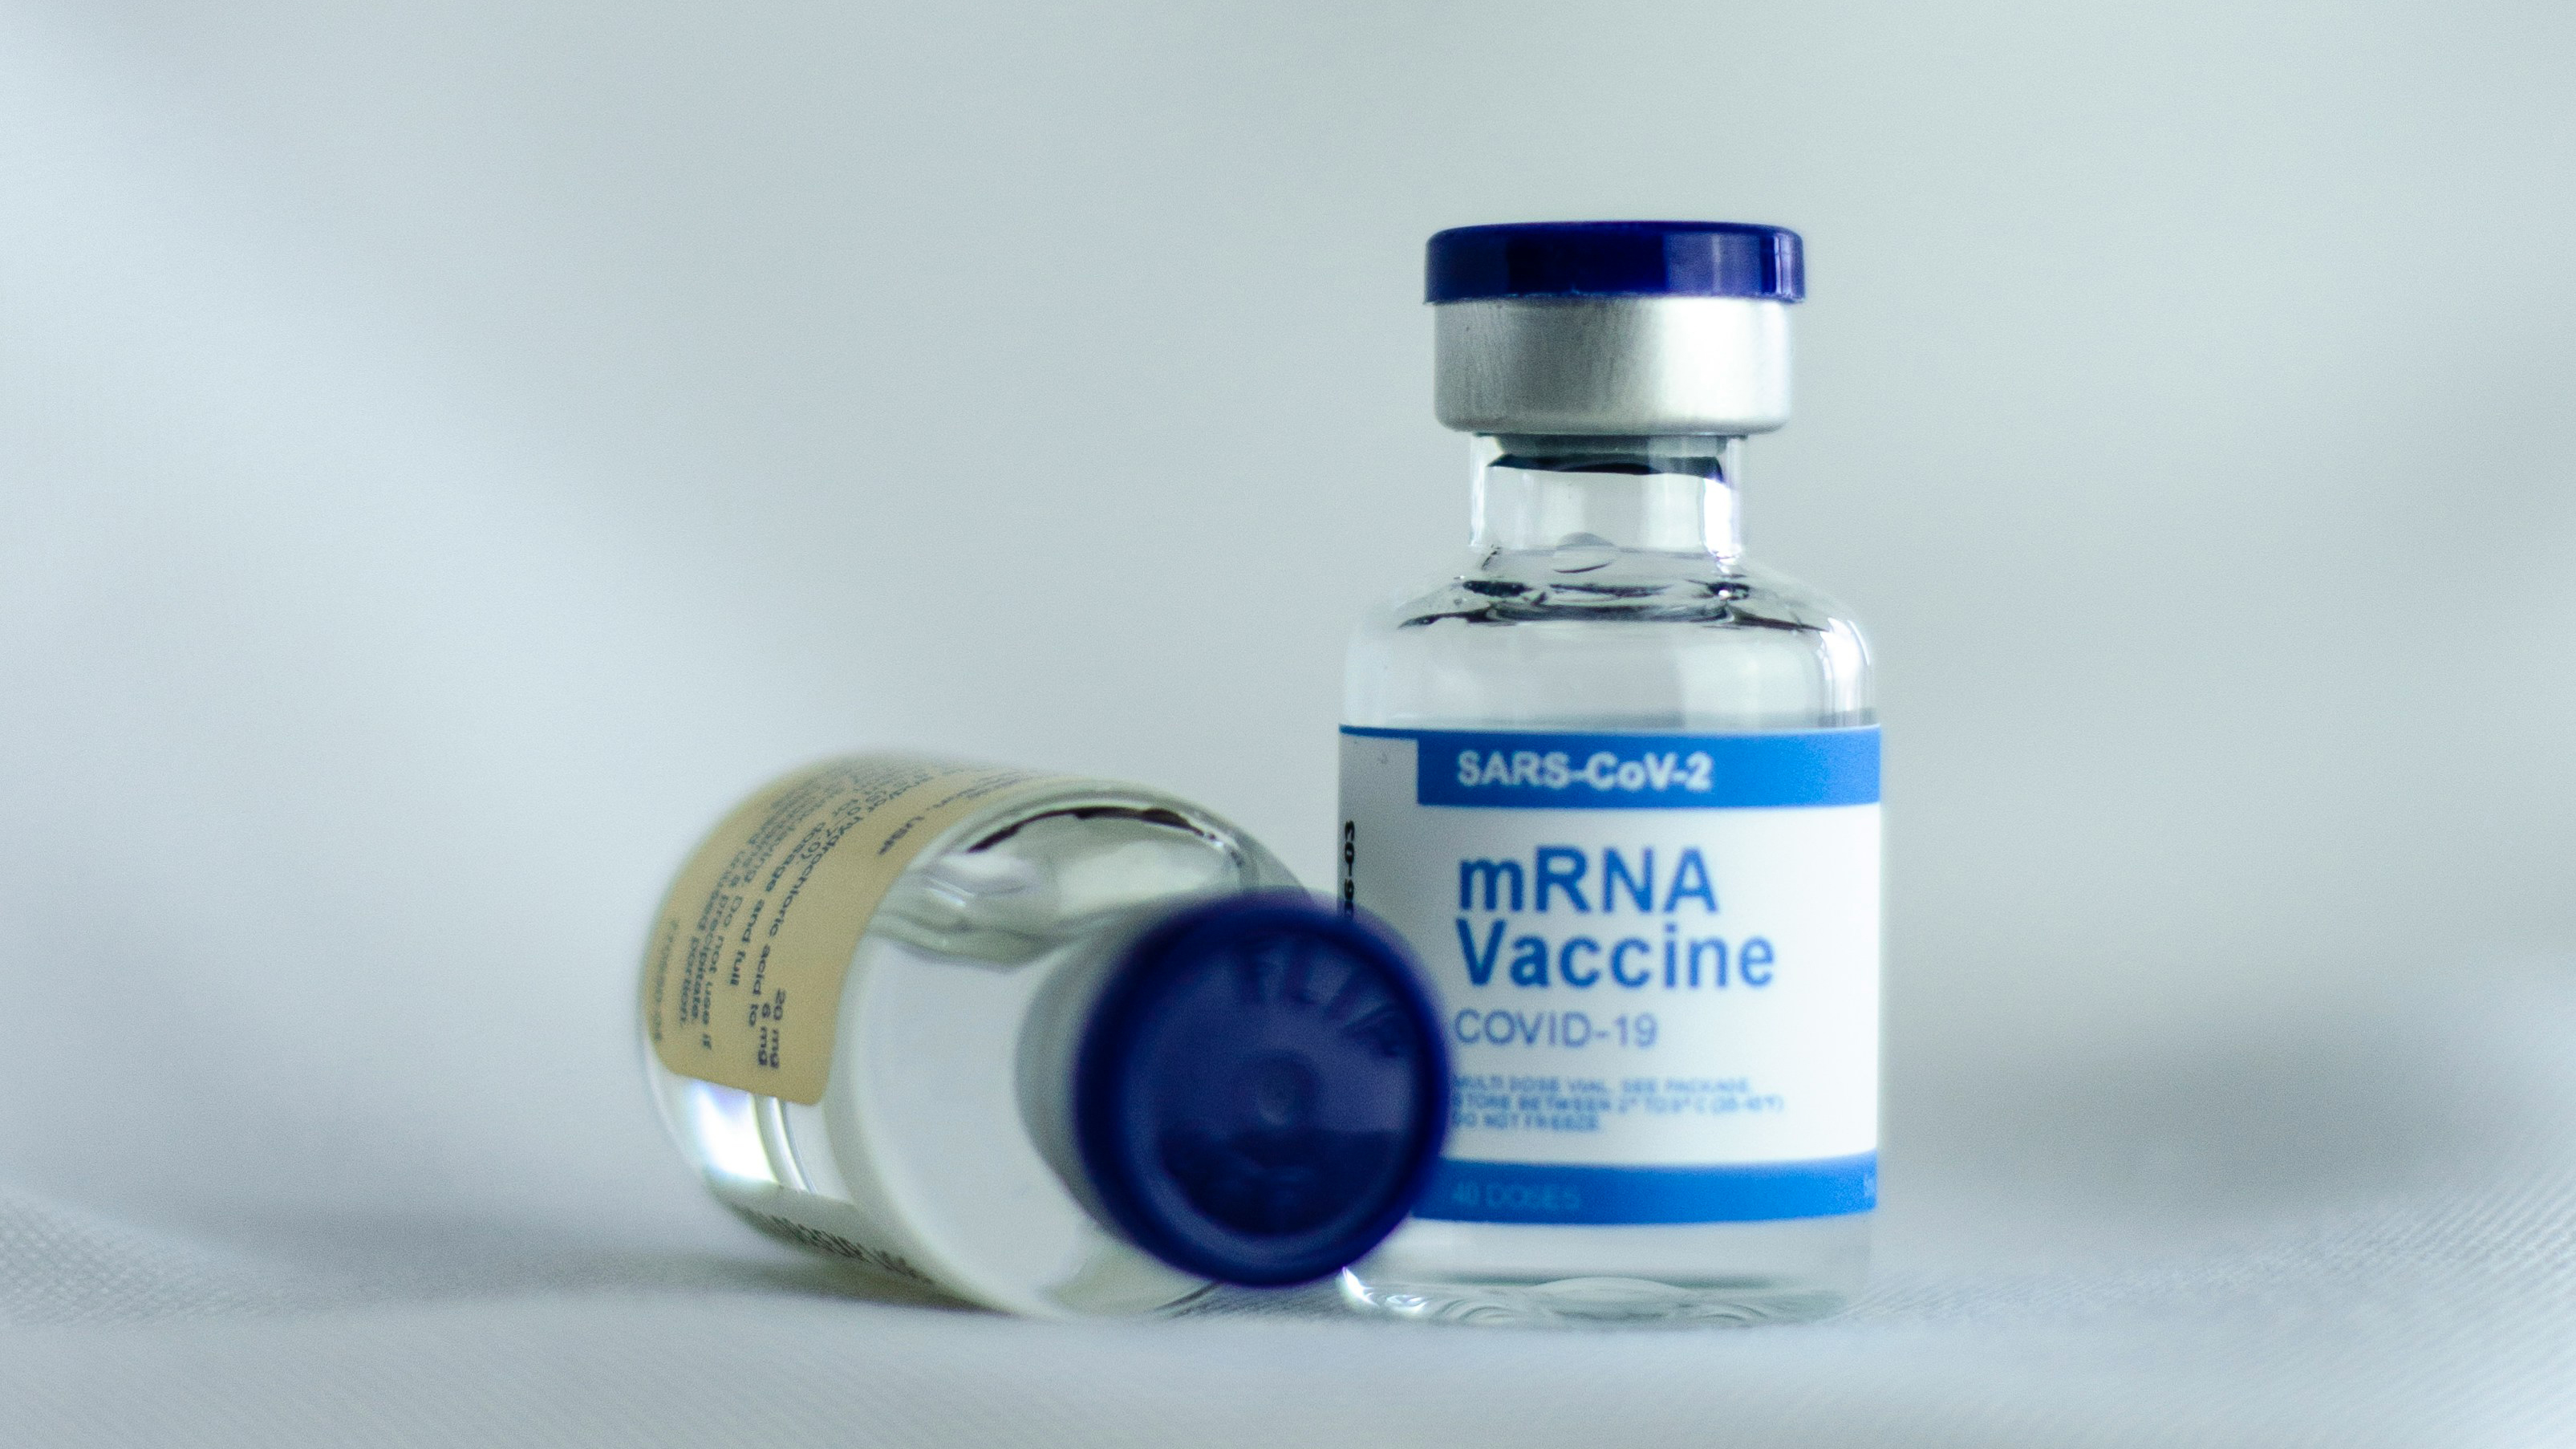 Most people’s first encounter with RNA therapeutics came when they were given mRNA vaccines to protect them against COVID-19. : Unsplash: Spencer Davis Unsplash Licence